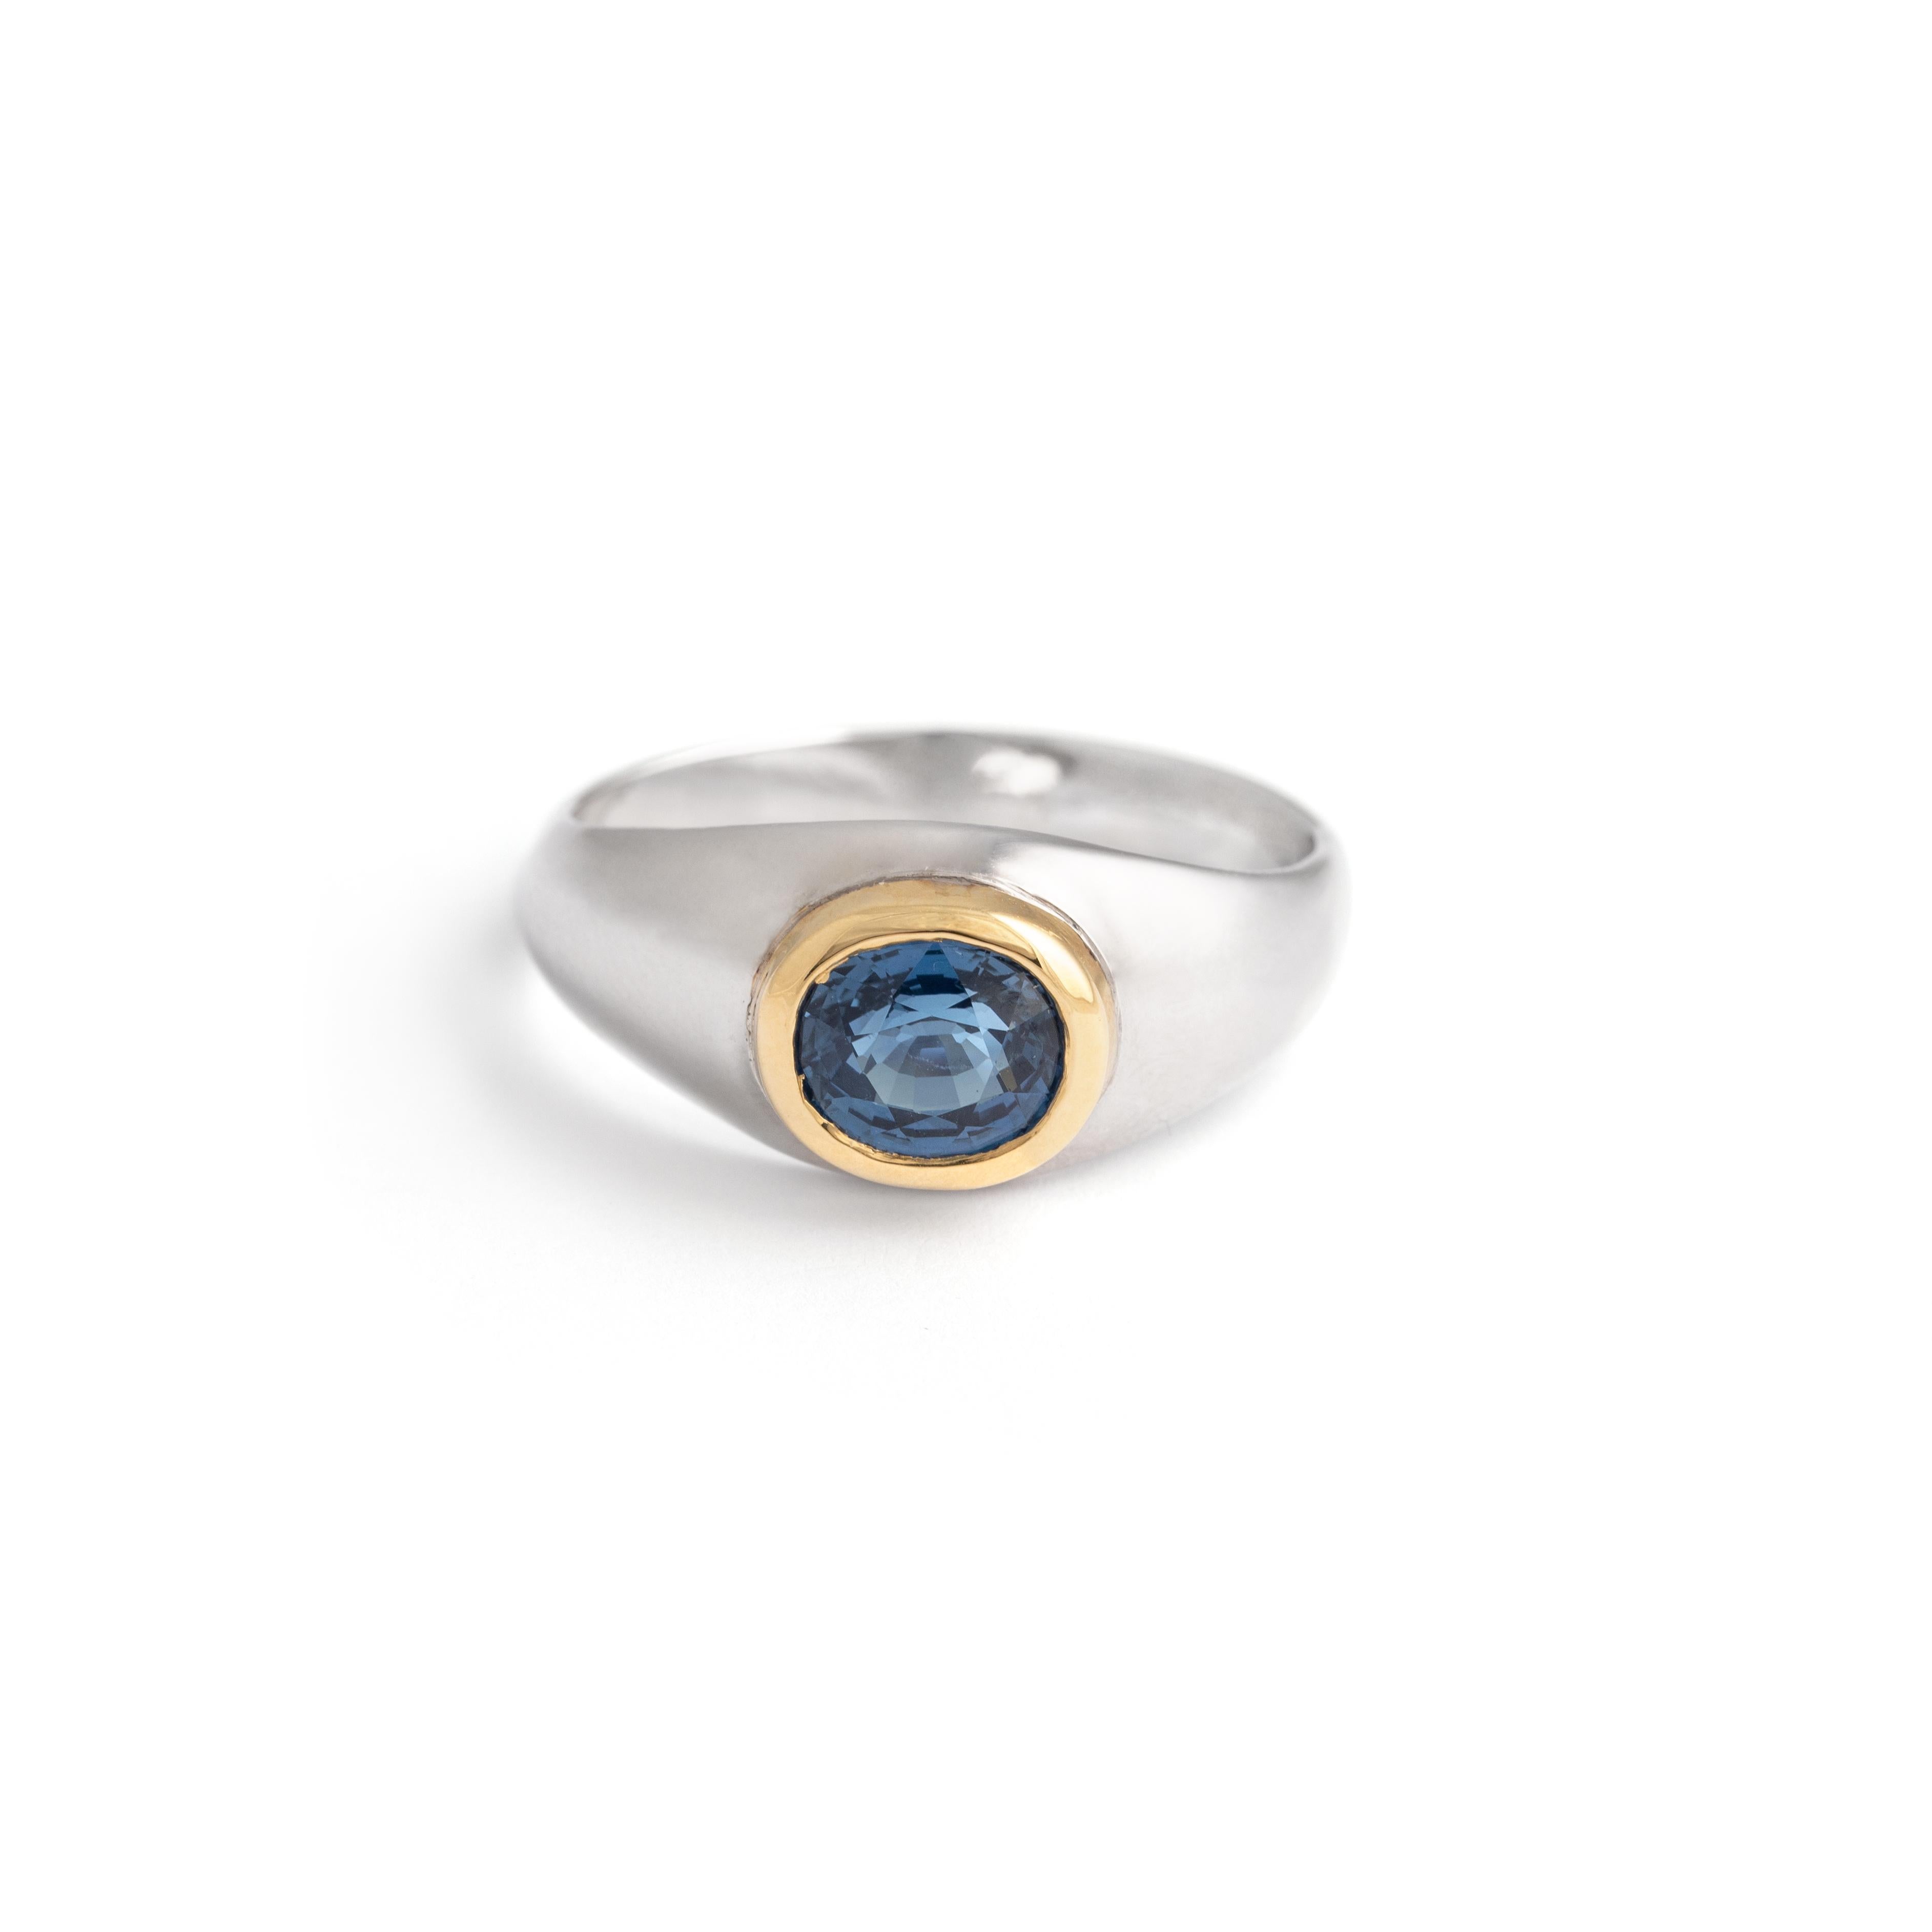 Sapphire 2.23 Carat mounted on 8.14 gr. white gold ring.
Swiss laboratory certificate.
Gross weight: 8.51 grams.
Size: 68.